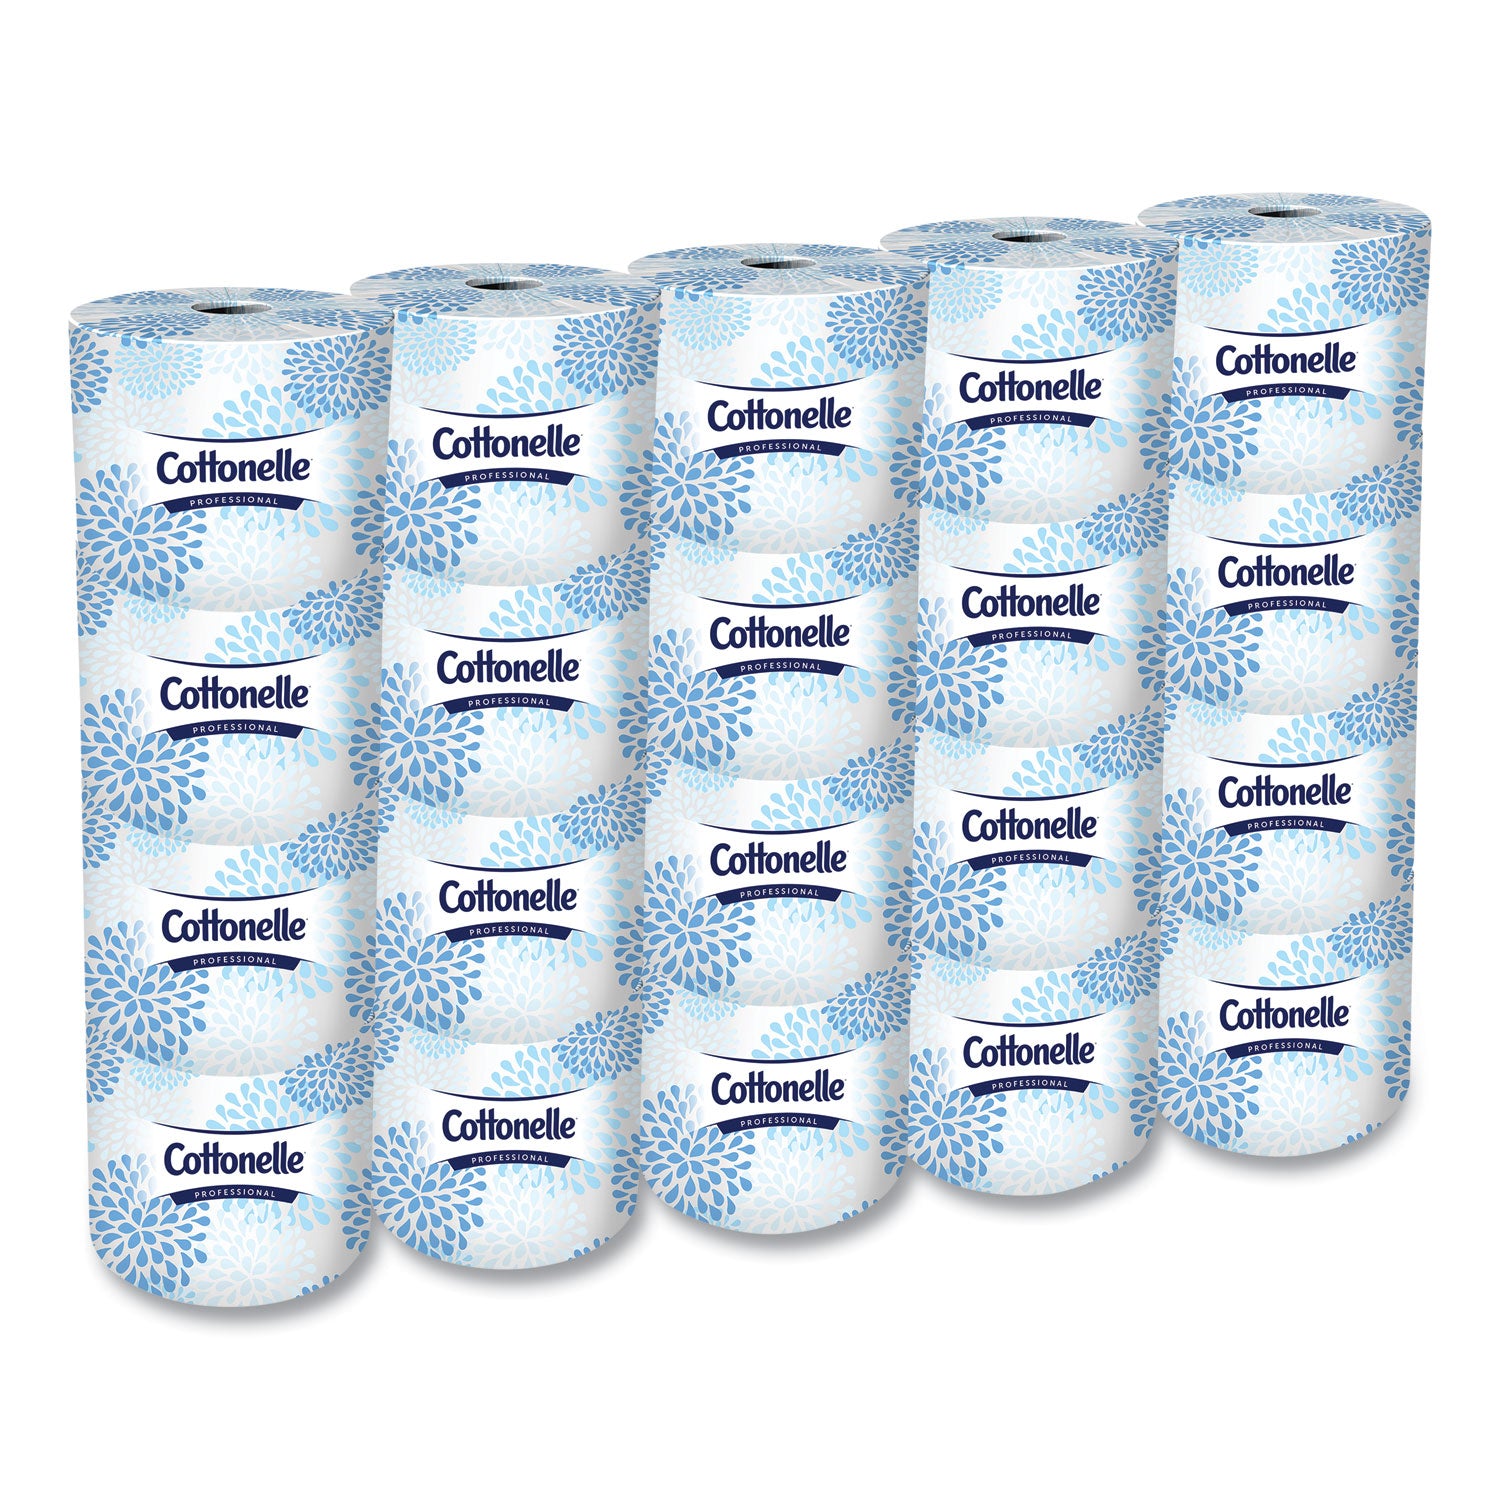 2-Ply Bathroom Tissue, Septic Safe, White, 451 Sheets/Roll, 20 Rolls/Carton - 